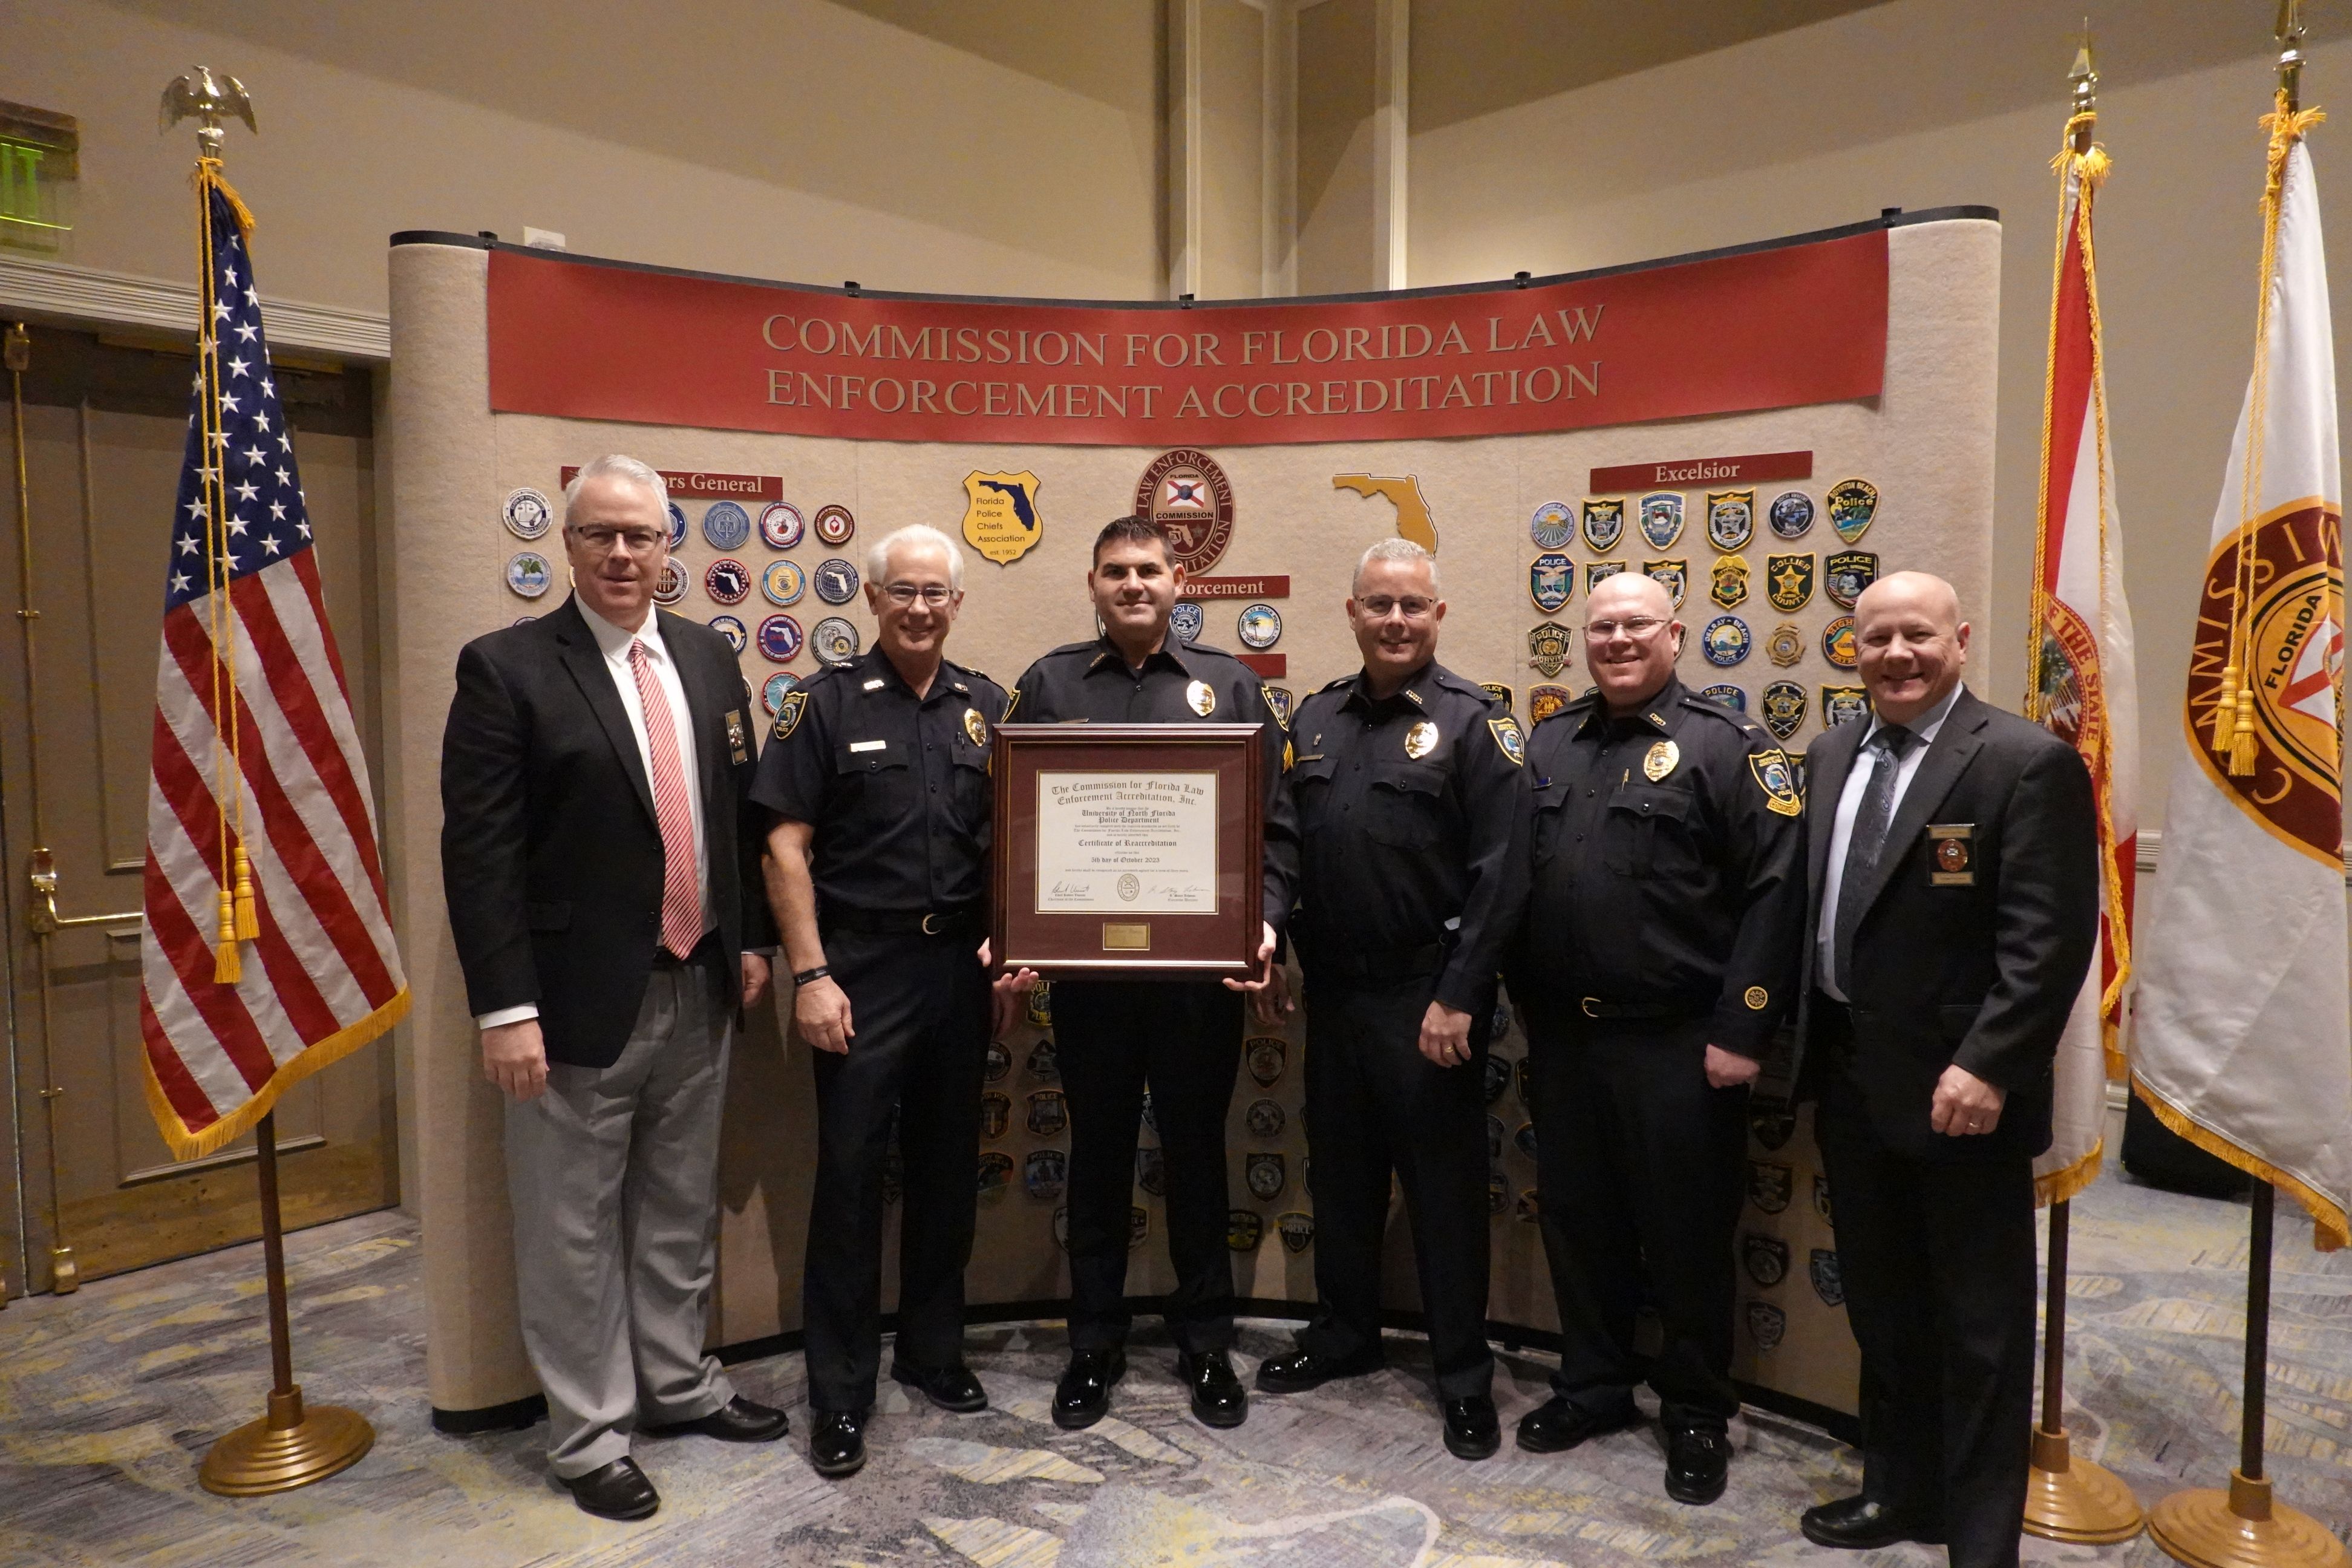 Members of the University Police Department displaying their certificate after being reaccredited by the Commission on Florida Law Enforcement Accreditation